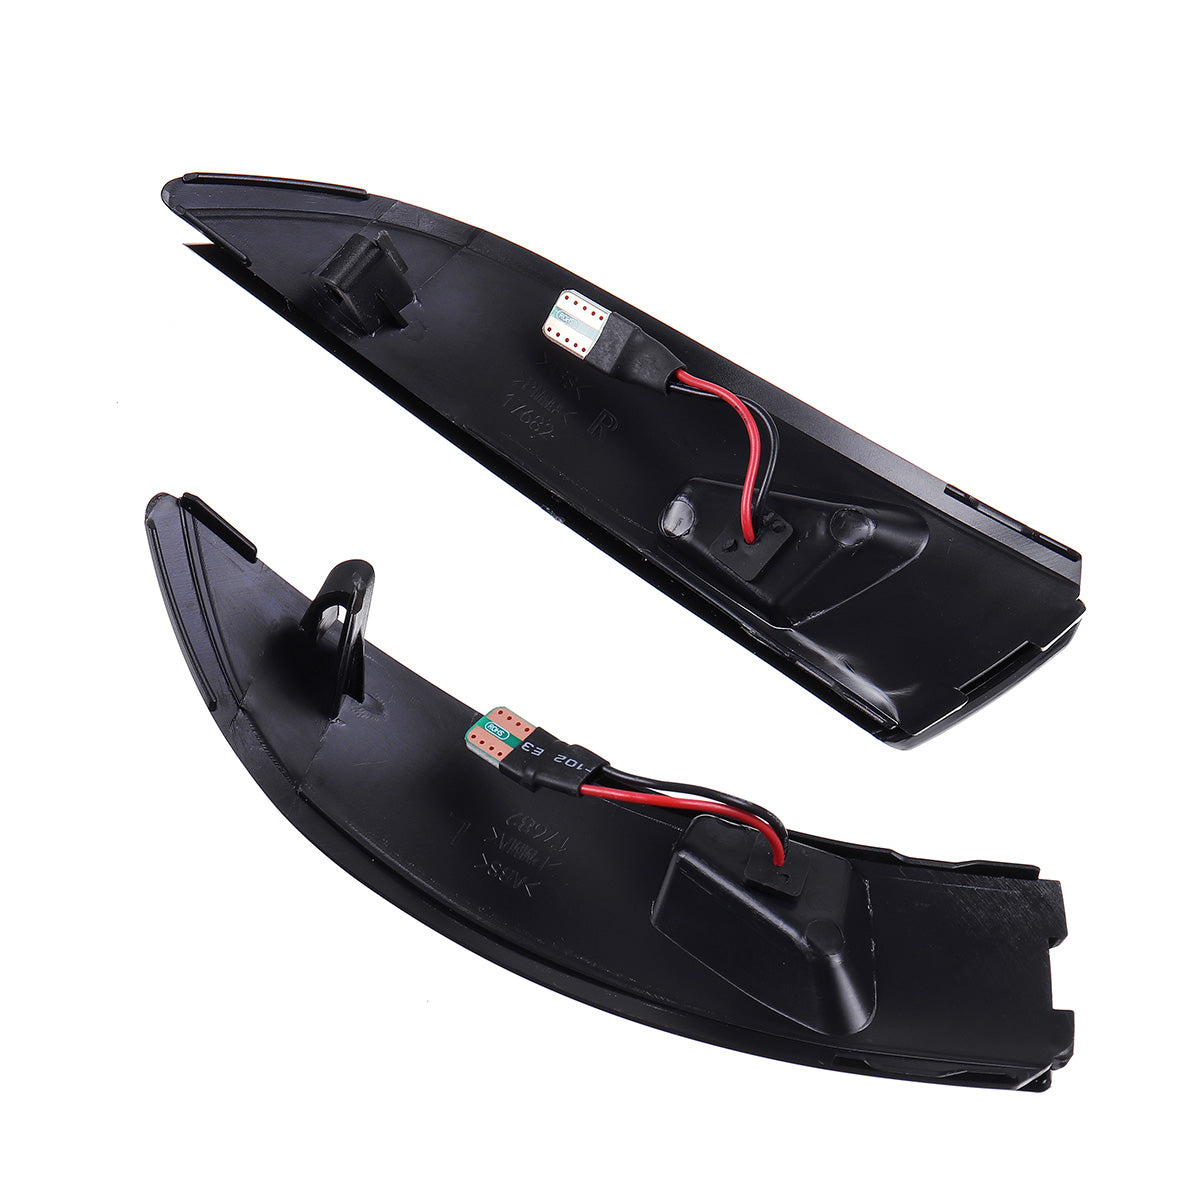 LED Dynamic Side Door Wing Mirror Indicator Lights Turn Lamps Smoked Black for Ford Fiesta B-Max 2008-2017 - Auto GoShop